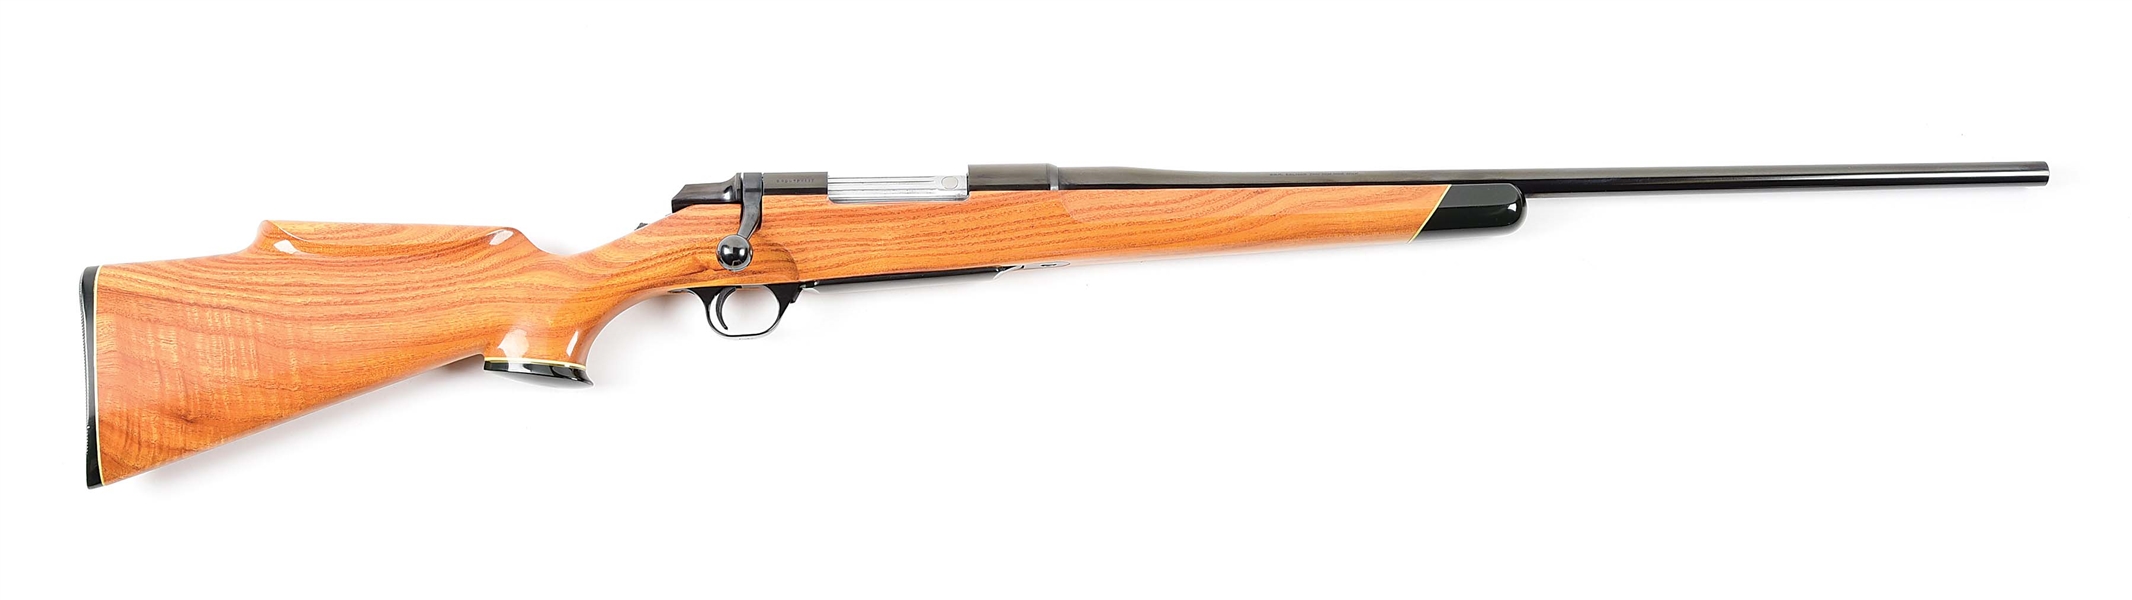 (M) BROWNING BBR BOLT ACTION RIFLE WITH CHINA BERRY STOCK.